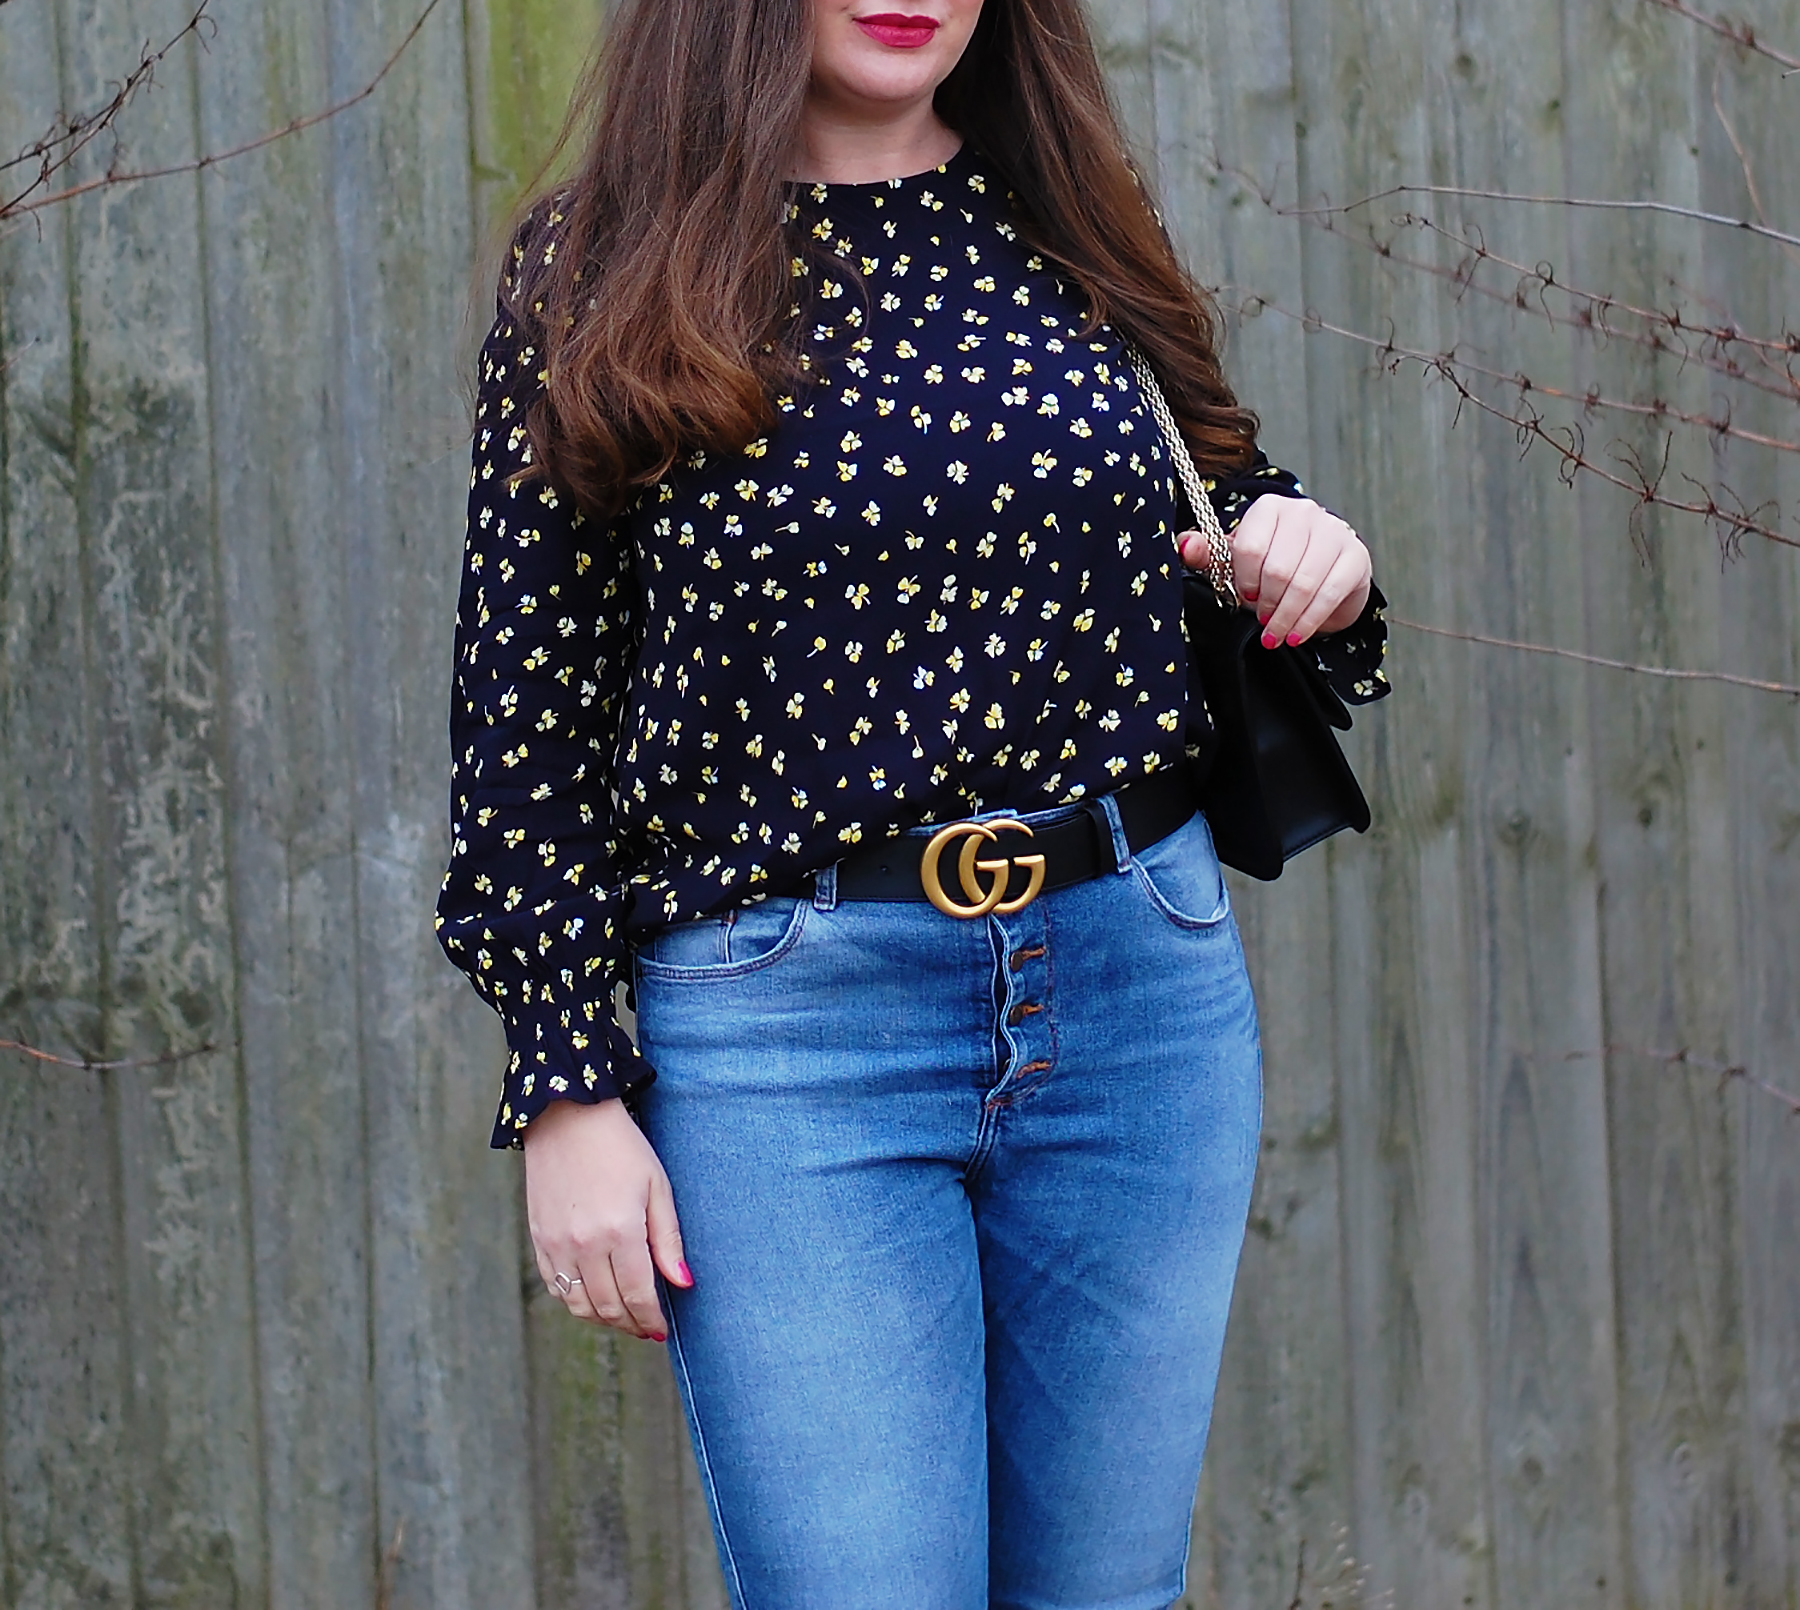 H&M Yellow and Navy Floral Blouse Outfit